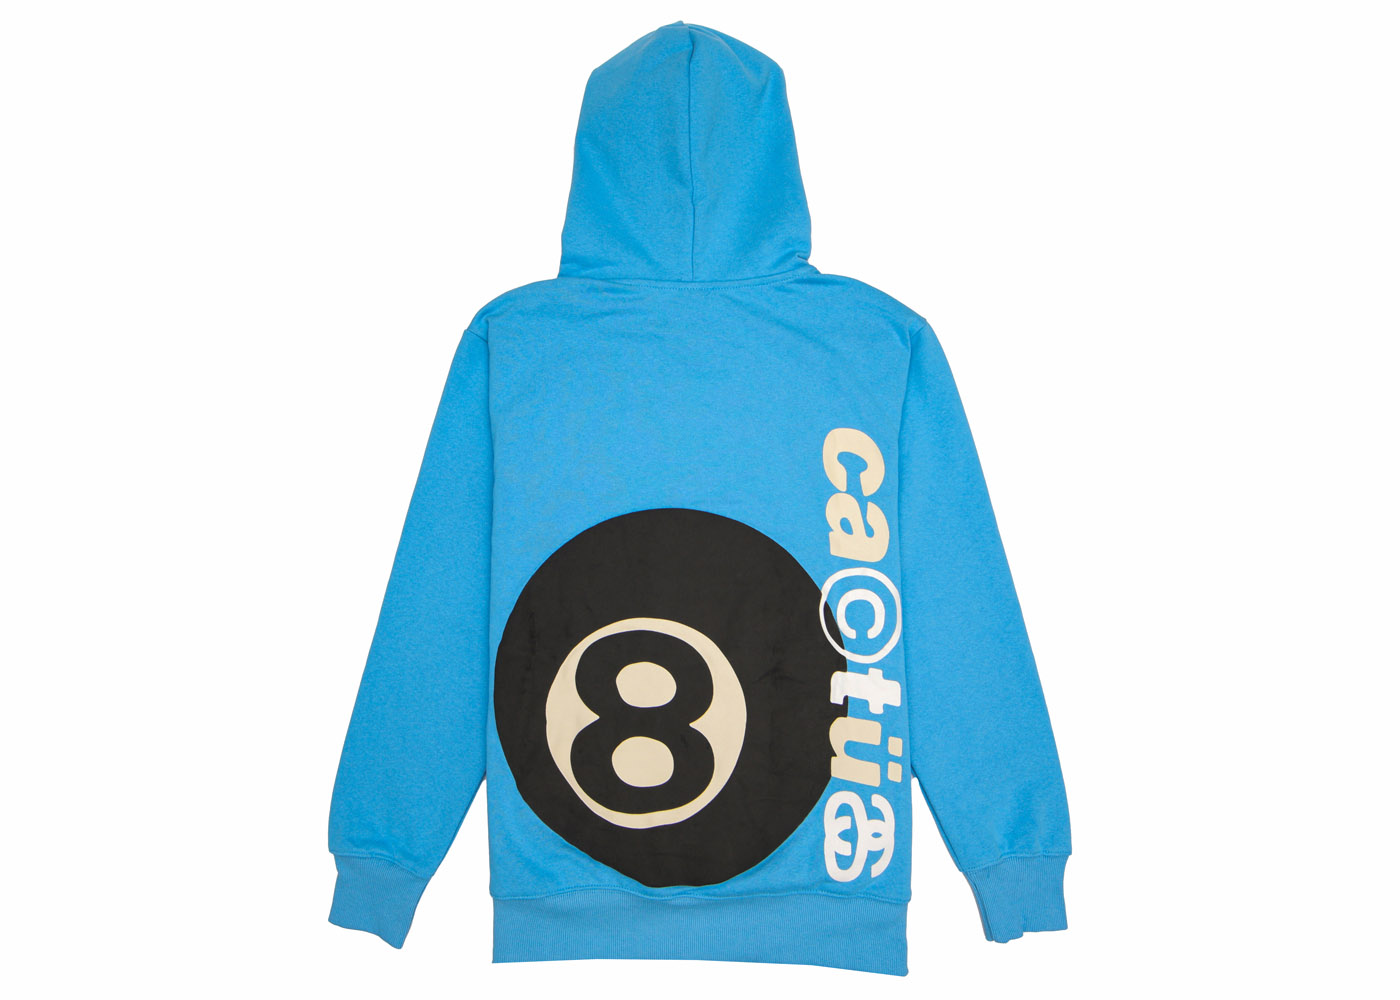 Stussy x CPFM 8 Ball Pigment Dyed Hoodie Blue Men's - SS22 - US